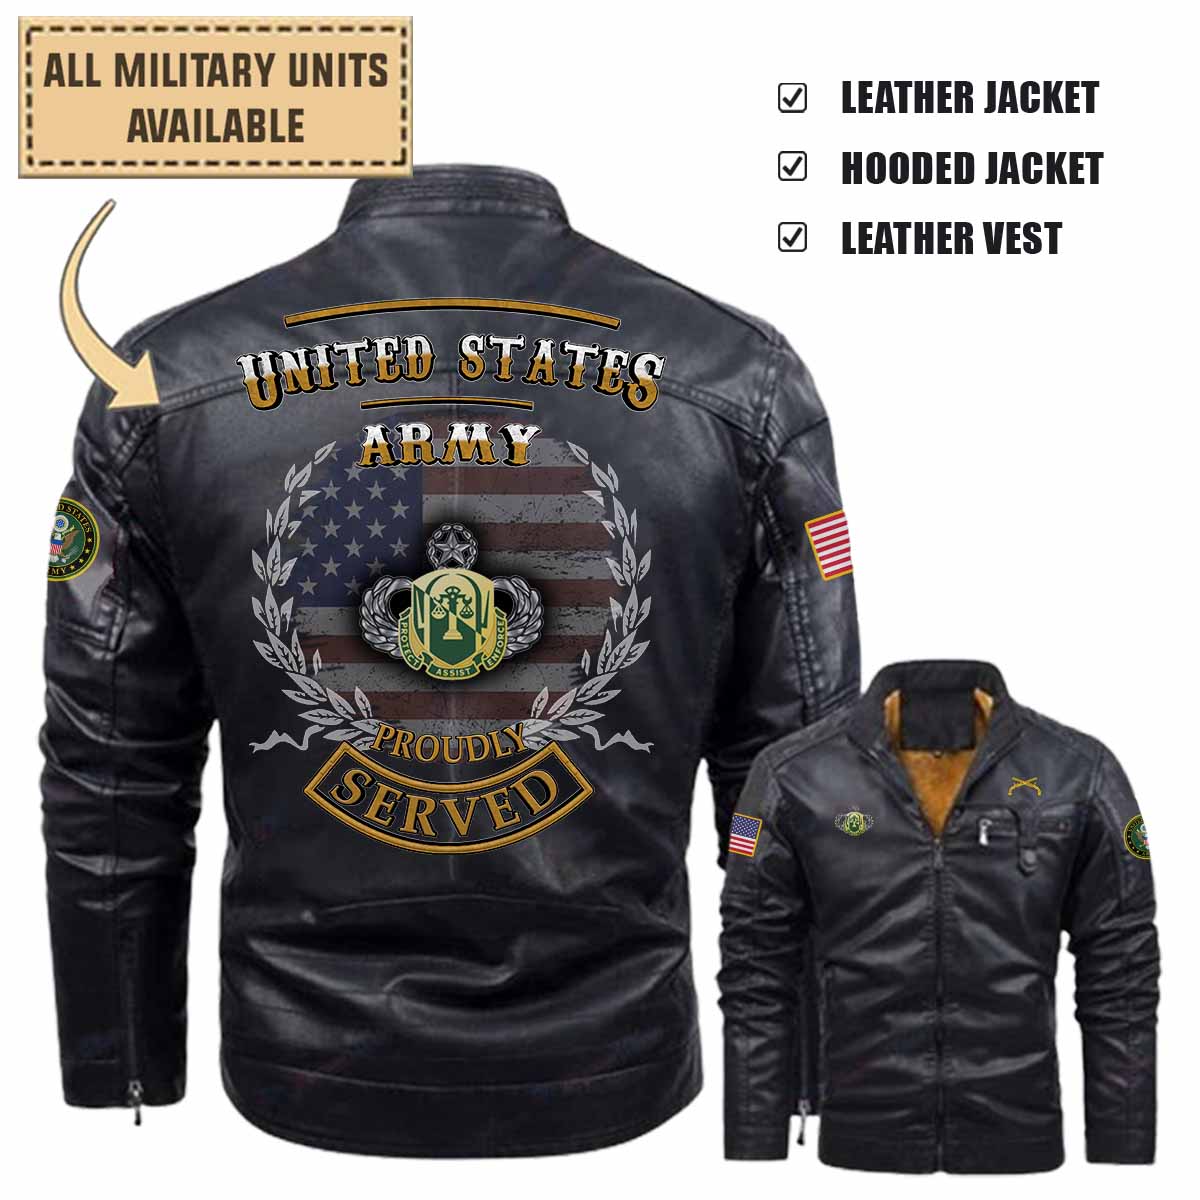 503rd MP BN 503rd Military Police Battalion_Military Leather Jacket and Vest